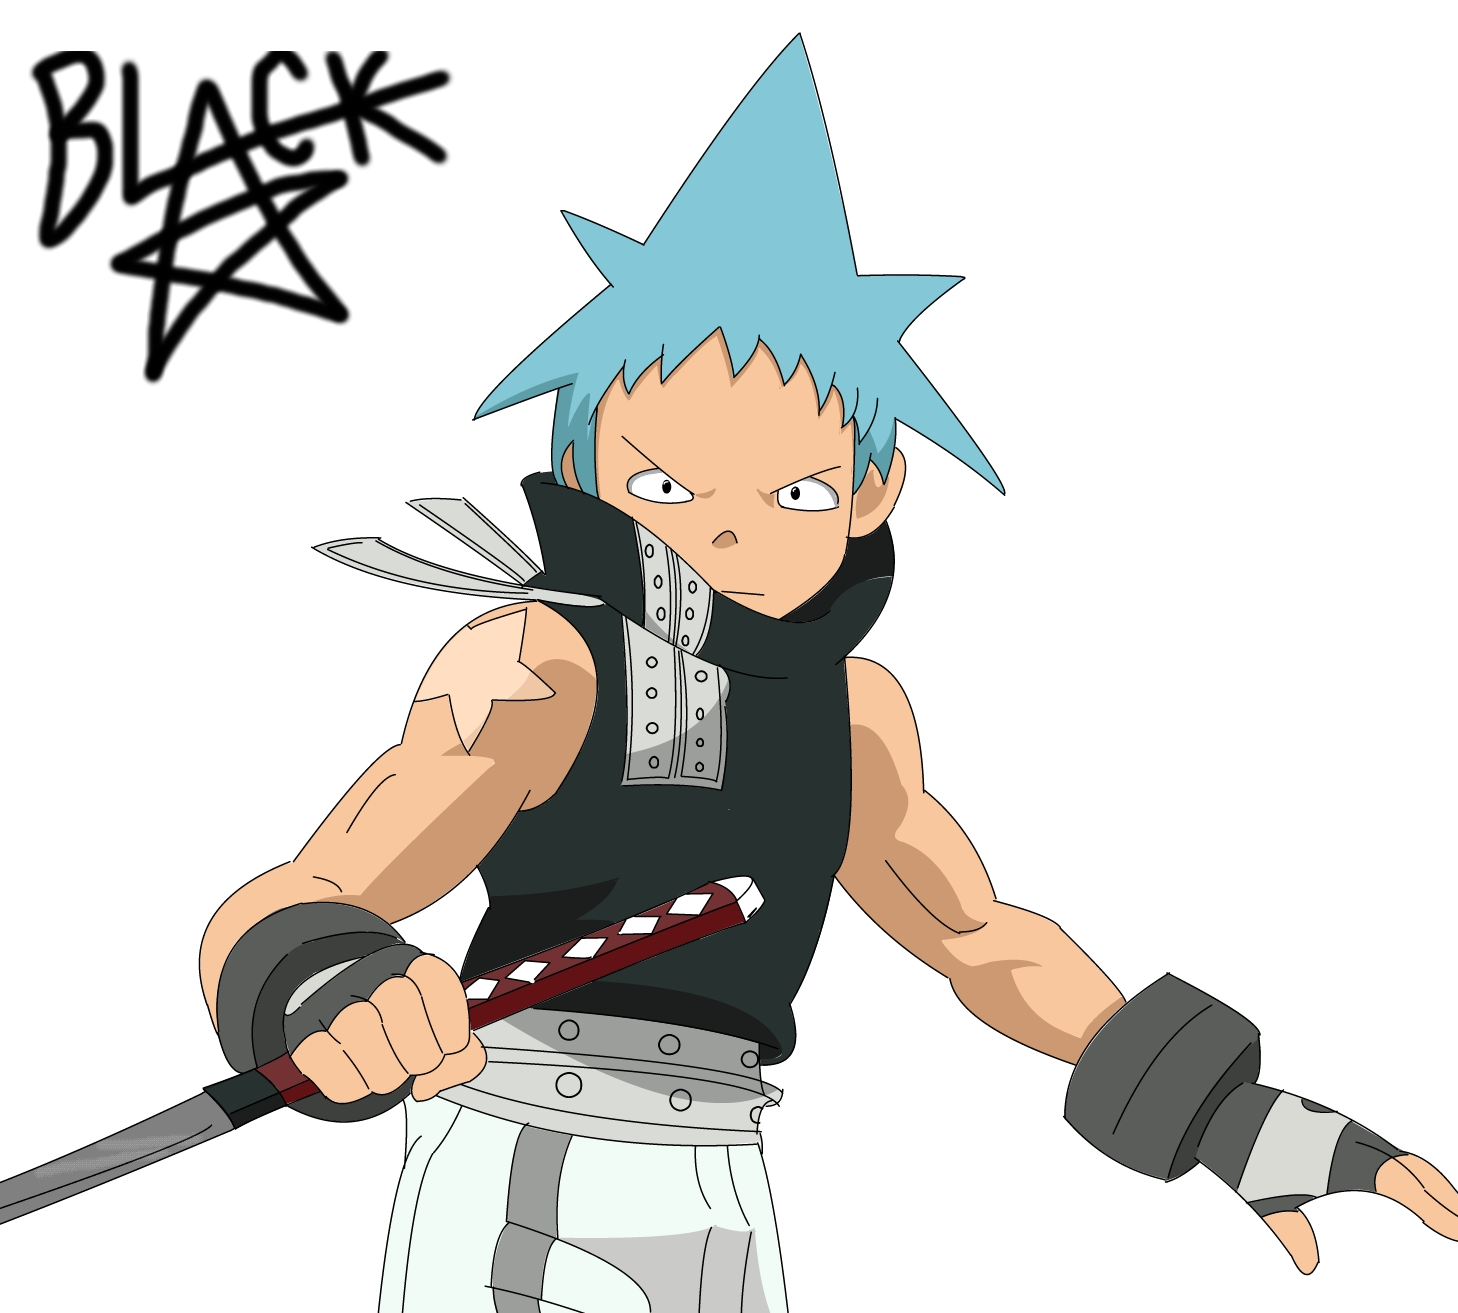 Black Star - Soul Eater by ReptilianCheese on DeviantArt